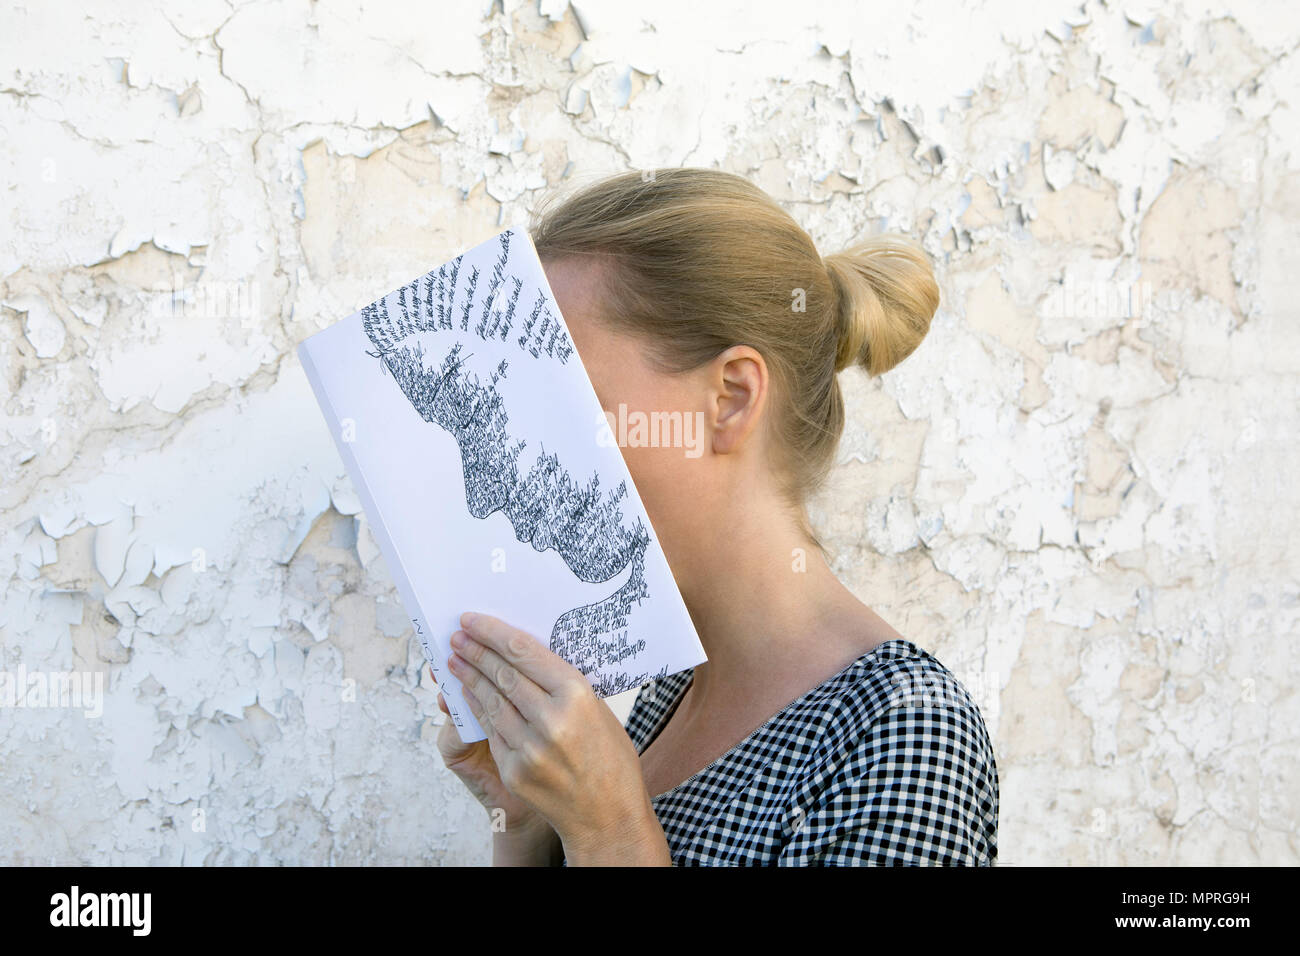 Woman covering face with book, reading poetry in front of wall Stock Photo